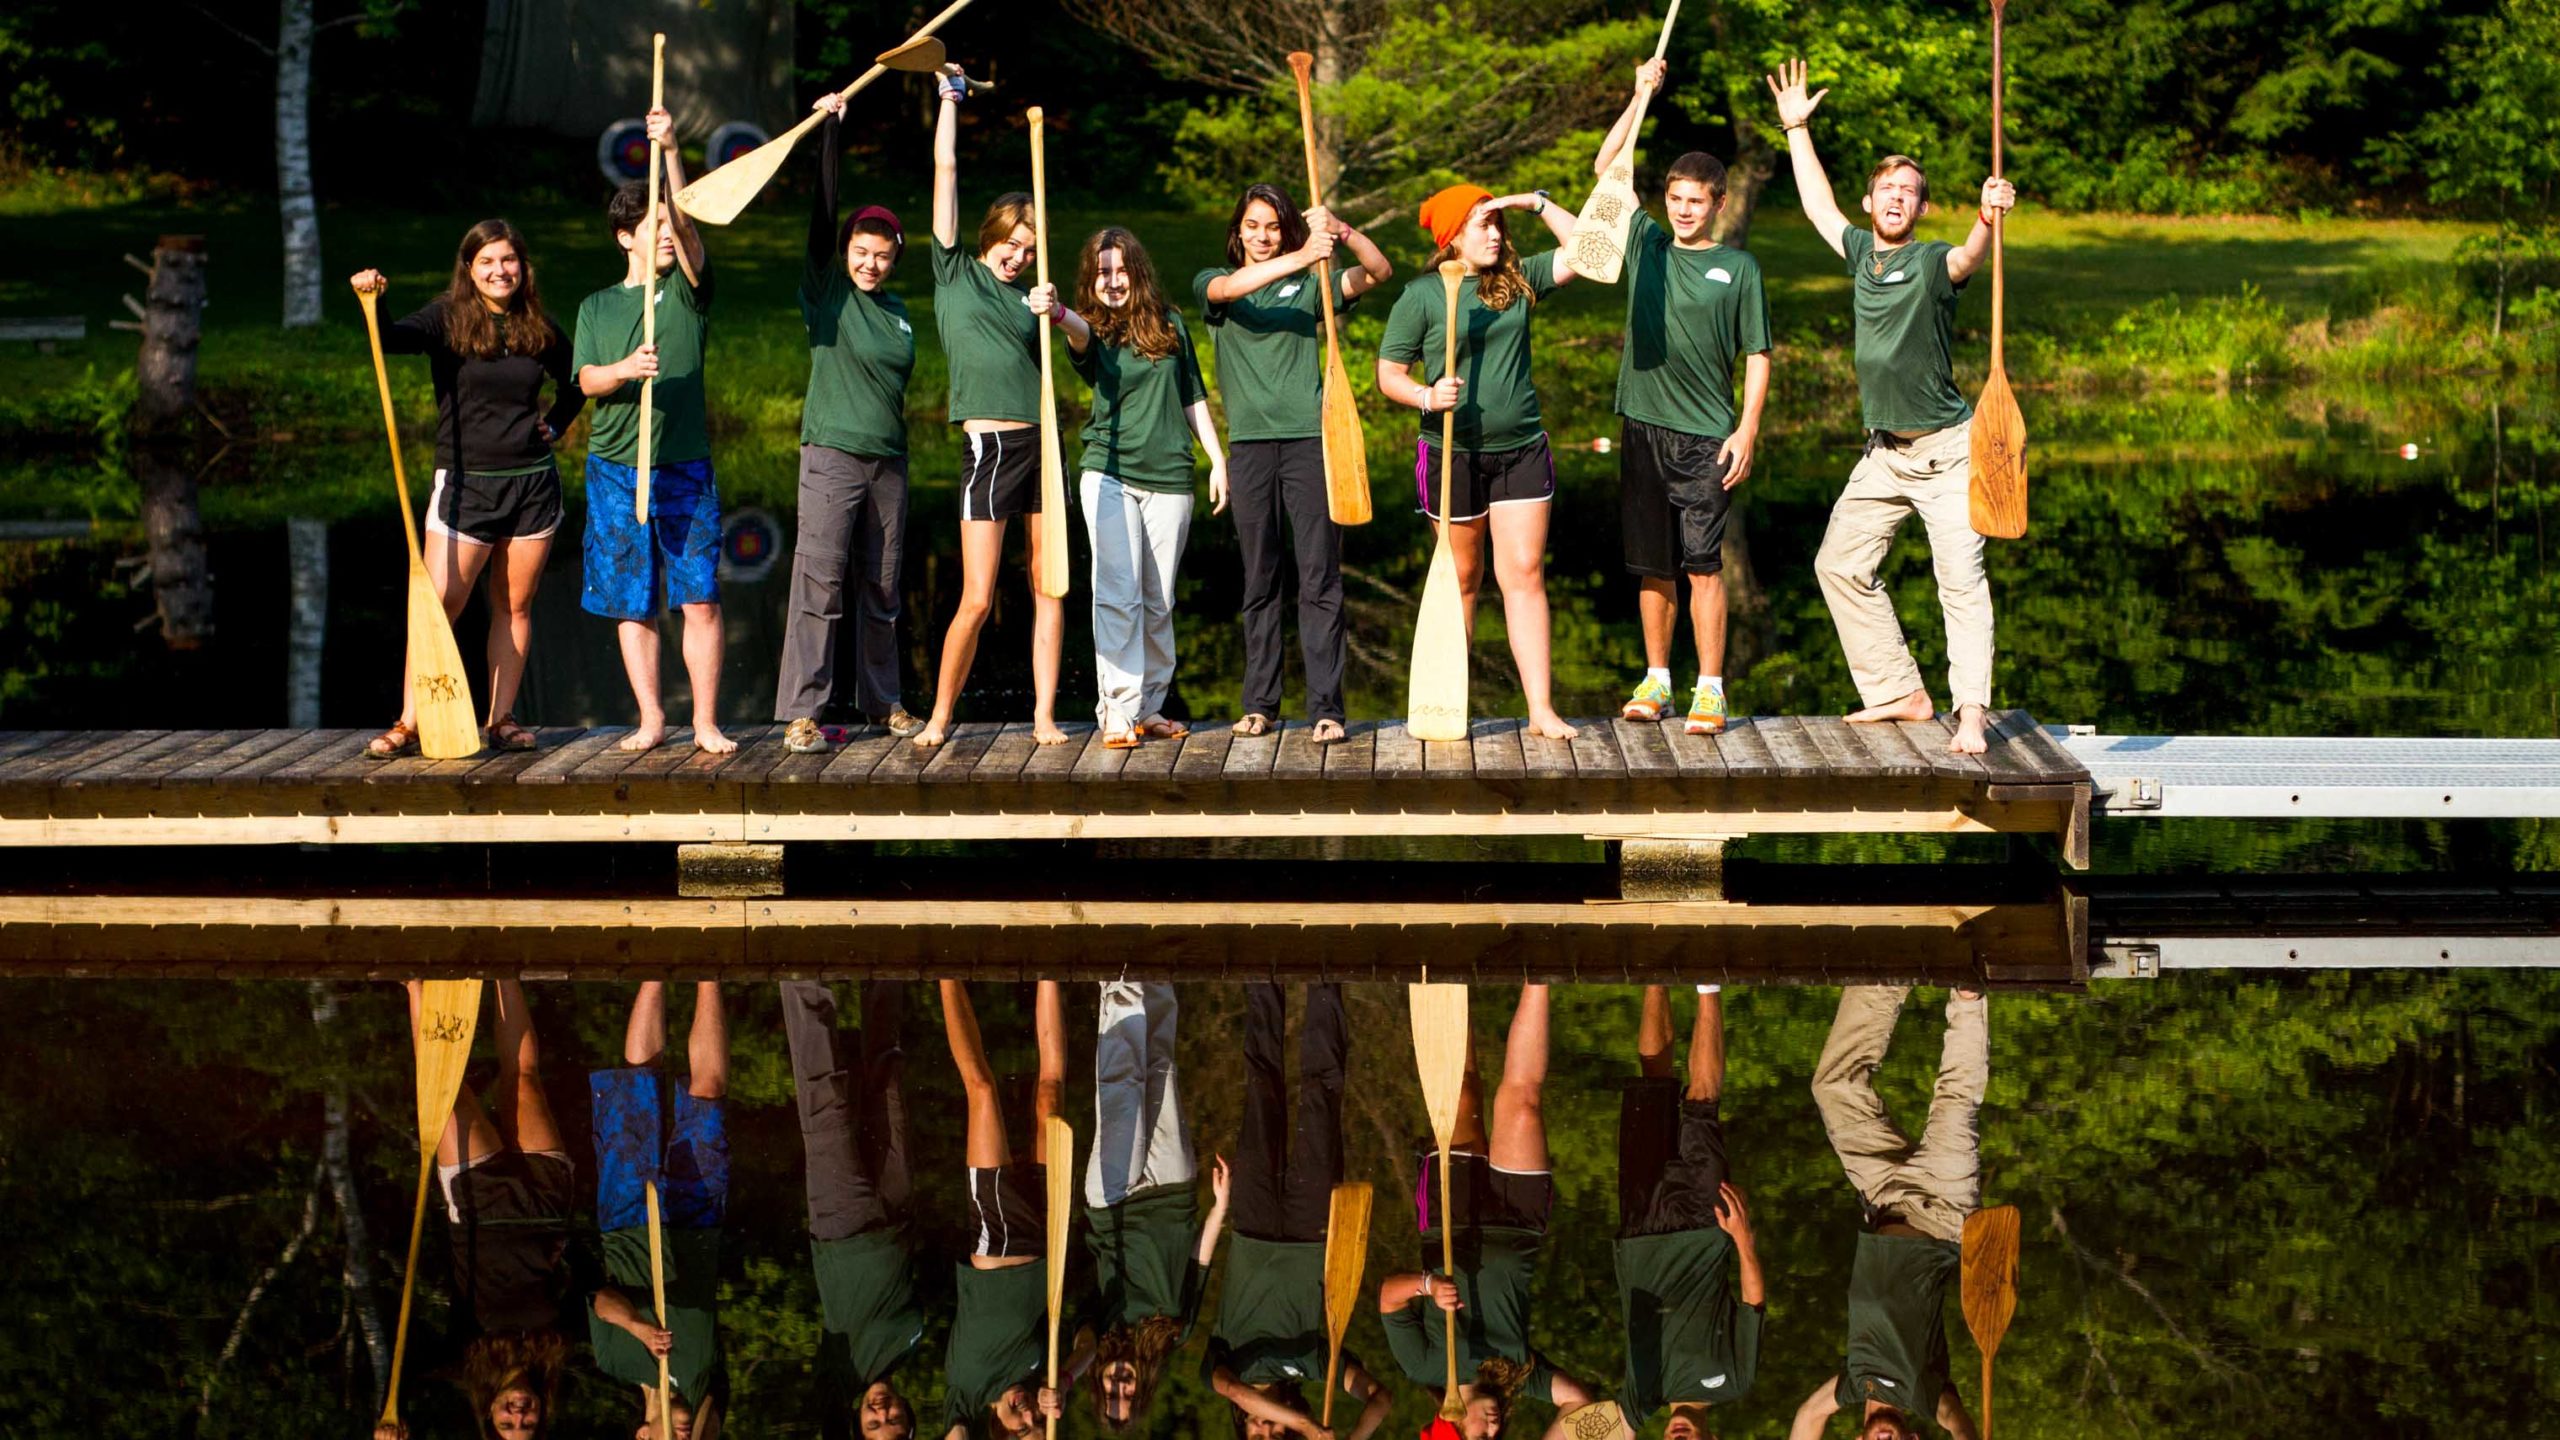 Campers standing on the dock holding paddles in the air.